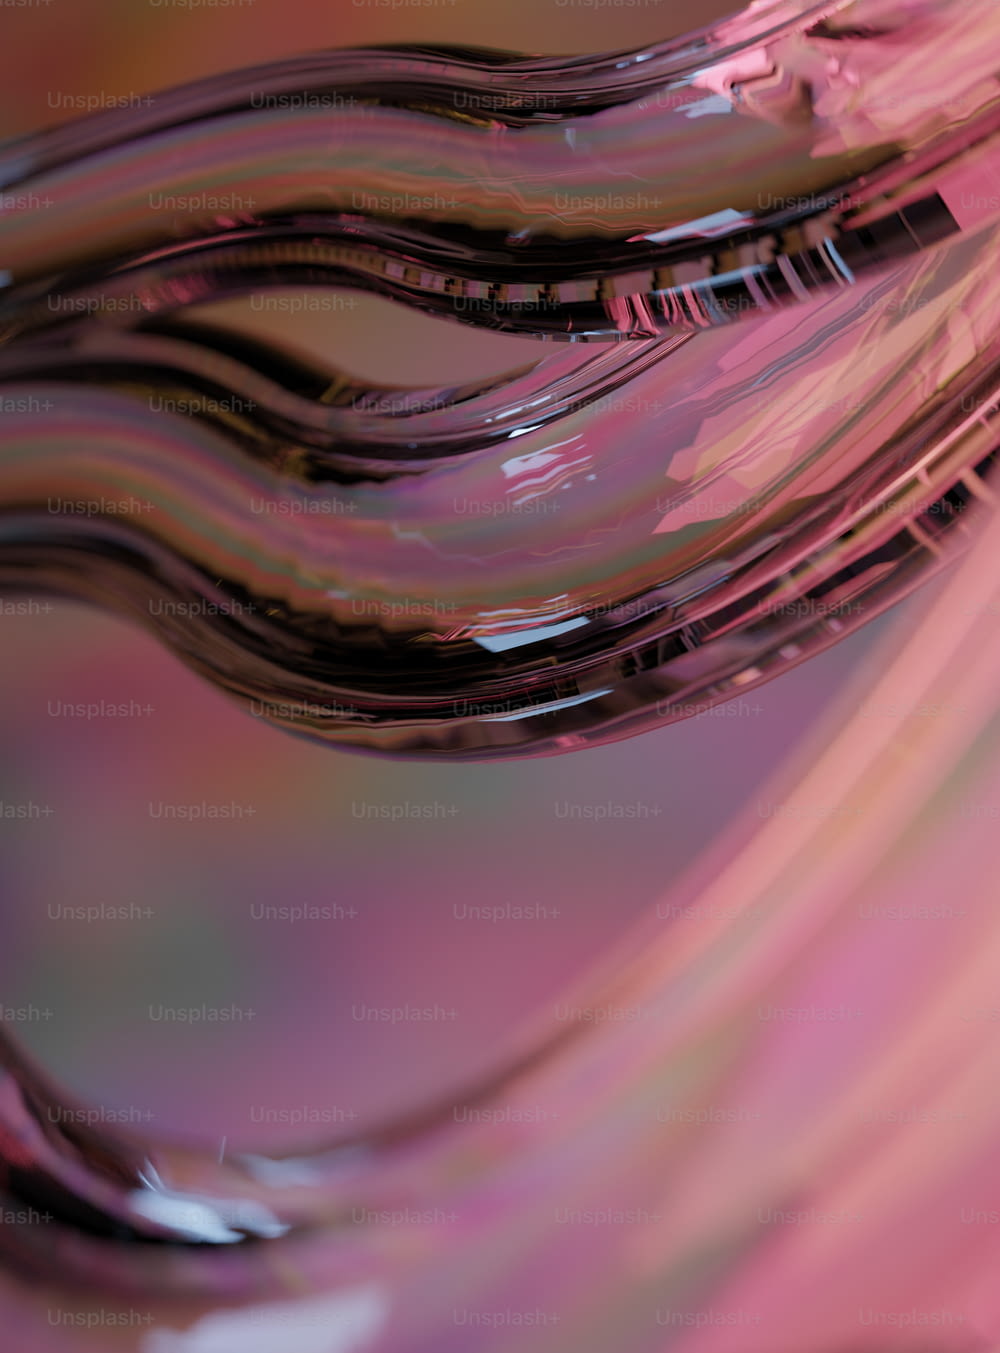 a close up of a pink object with a blurry background